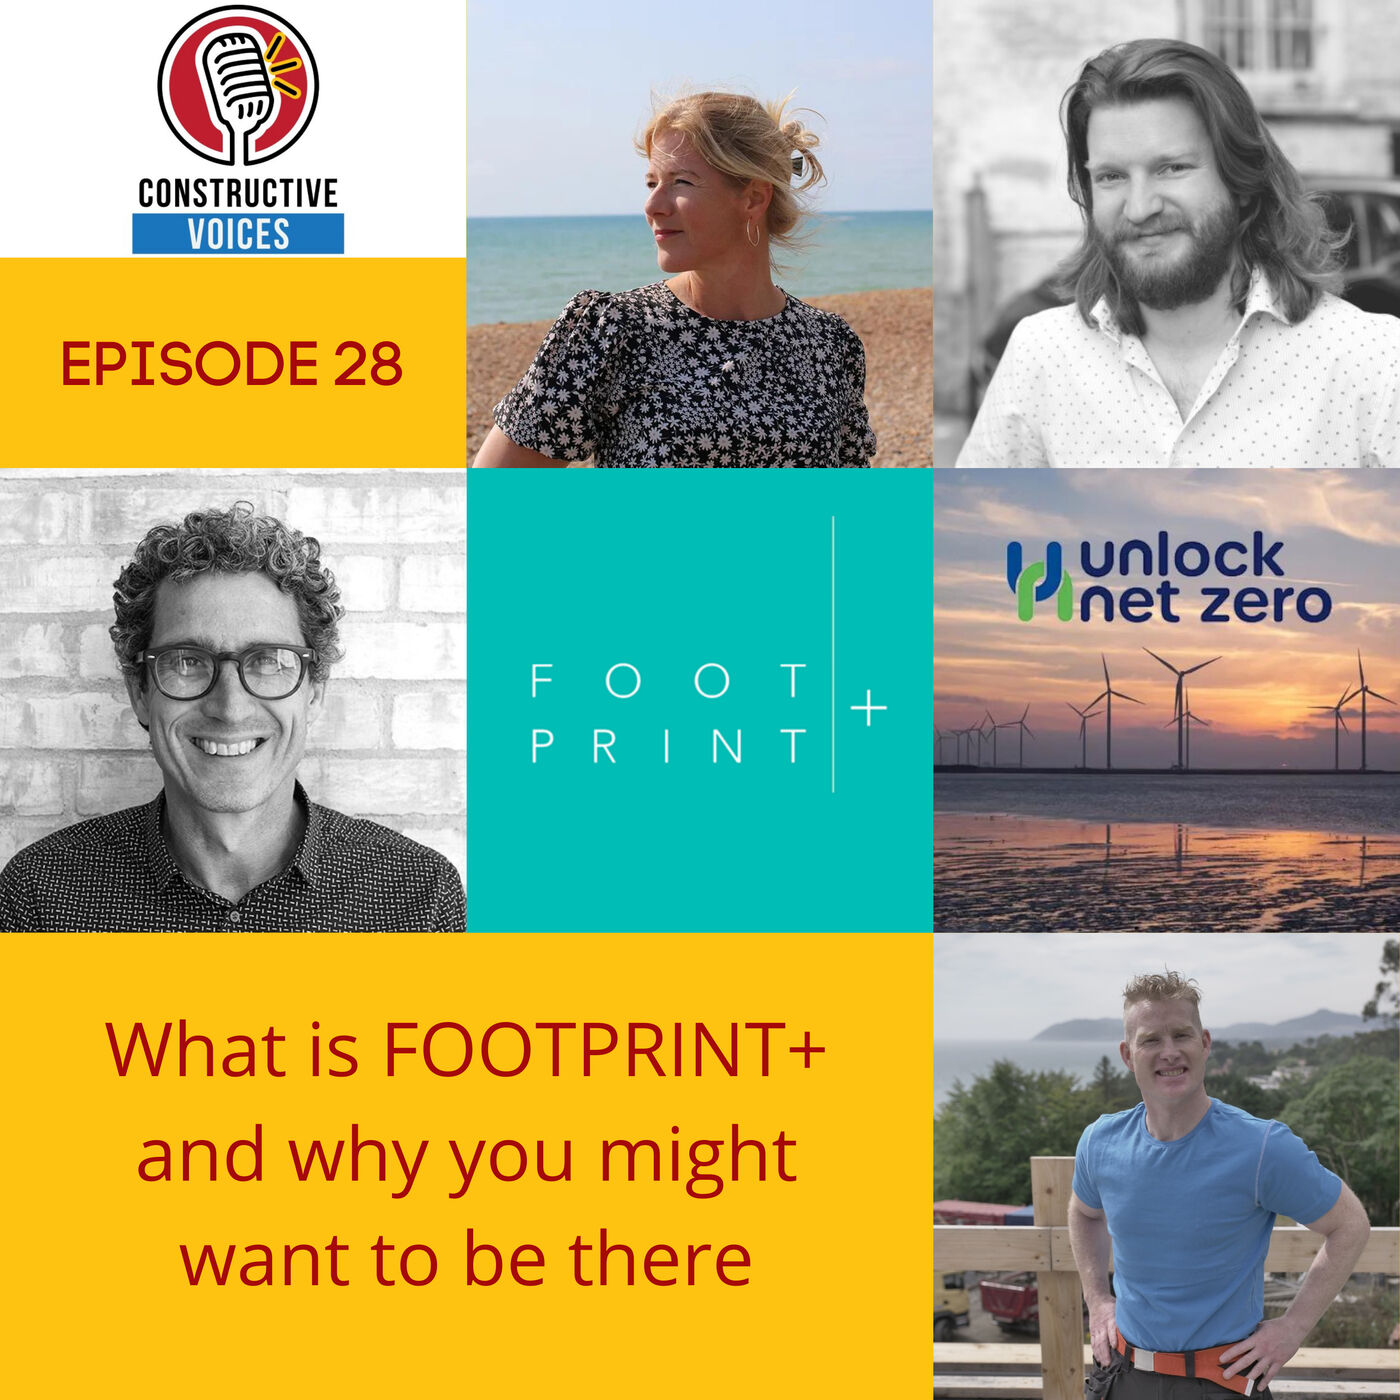 What is Footprint + and why you might want to be there